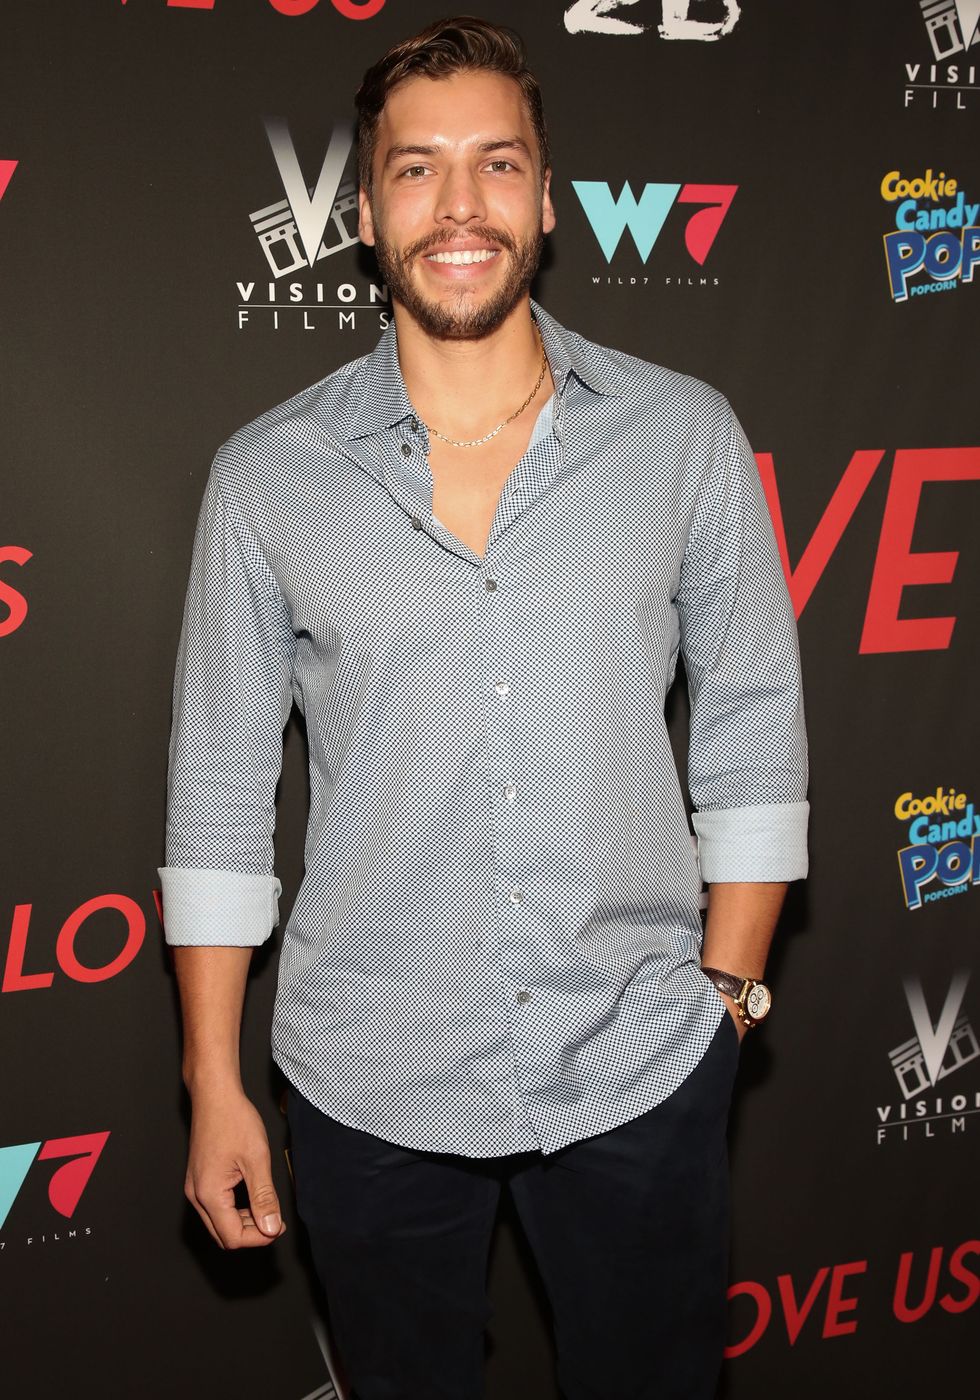 los angeles, california   september 13 joseph baena attends the premiere of "i love us" at harmony gold on september 13, 2021 in los angeles, california photo by paul archuletagetty images